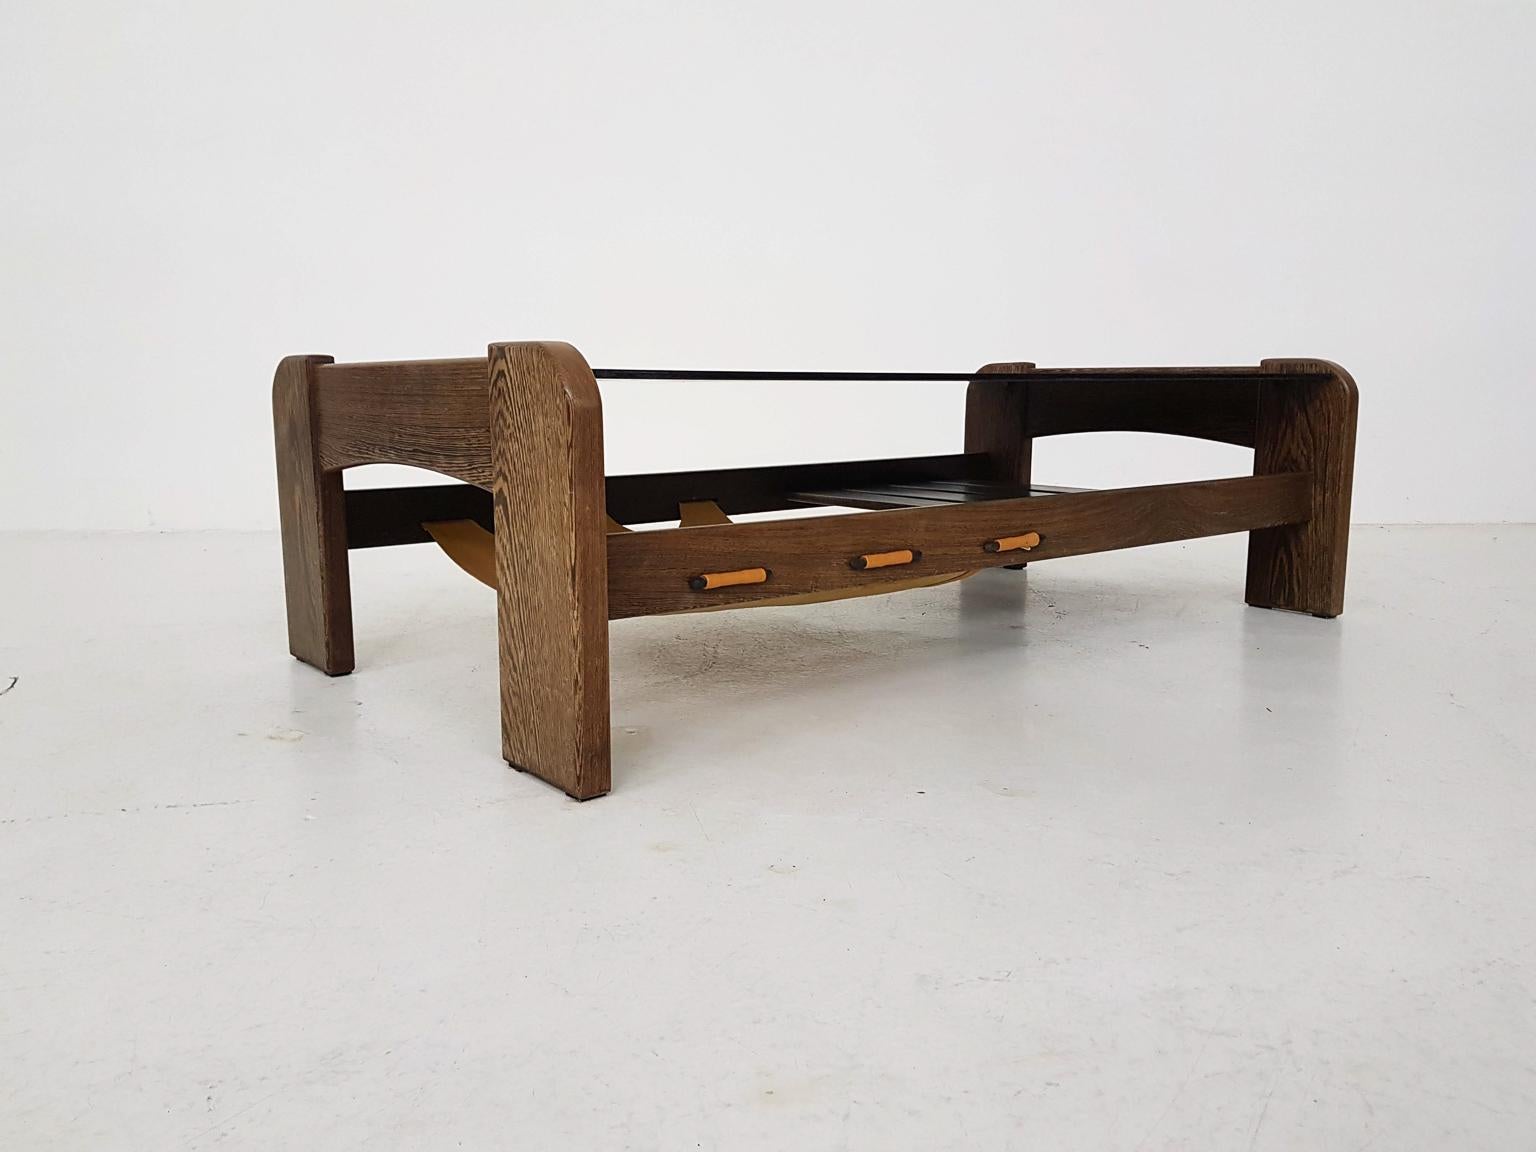 Brazilian Percival Lafer Attributed Glass, Wenge and Leather Coffee Table, Brasil, 1970s